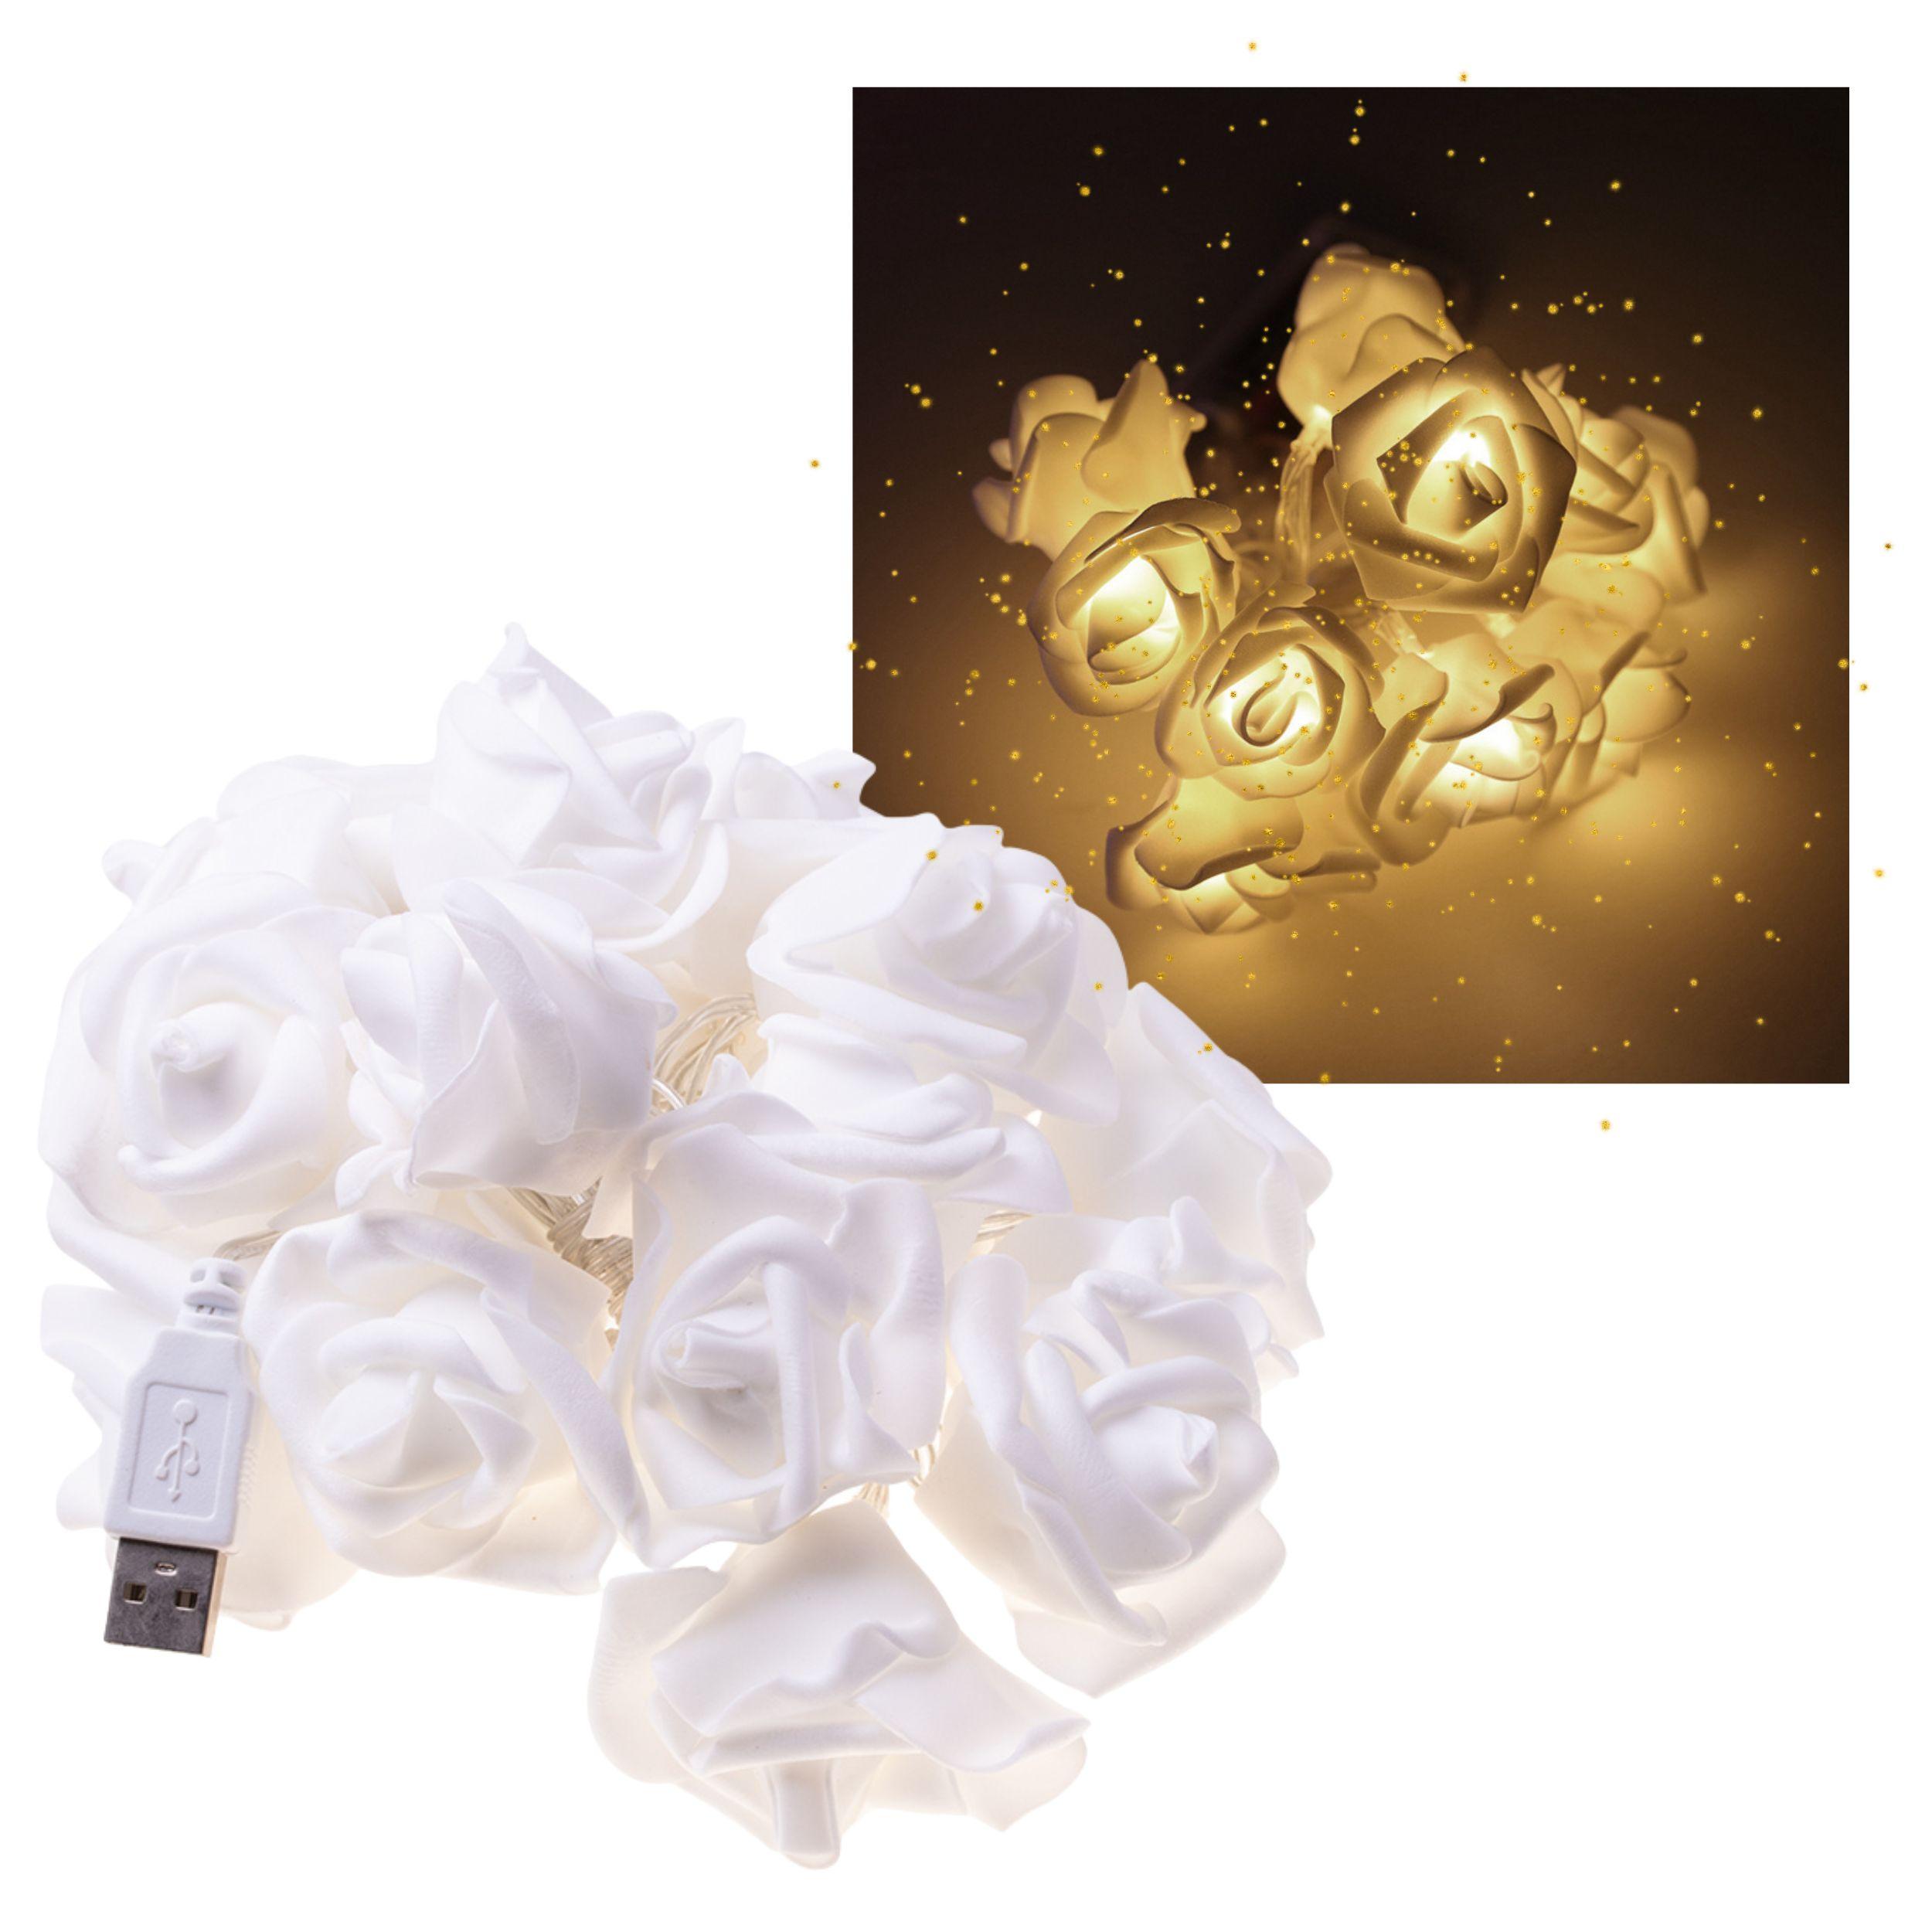 Garland / decorative LED lights in the shape of roses - warm color